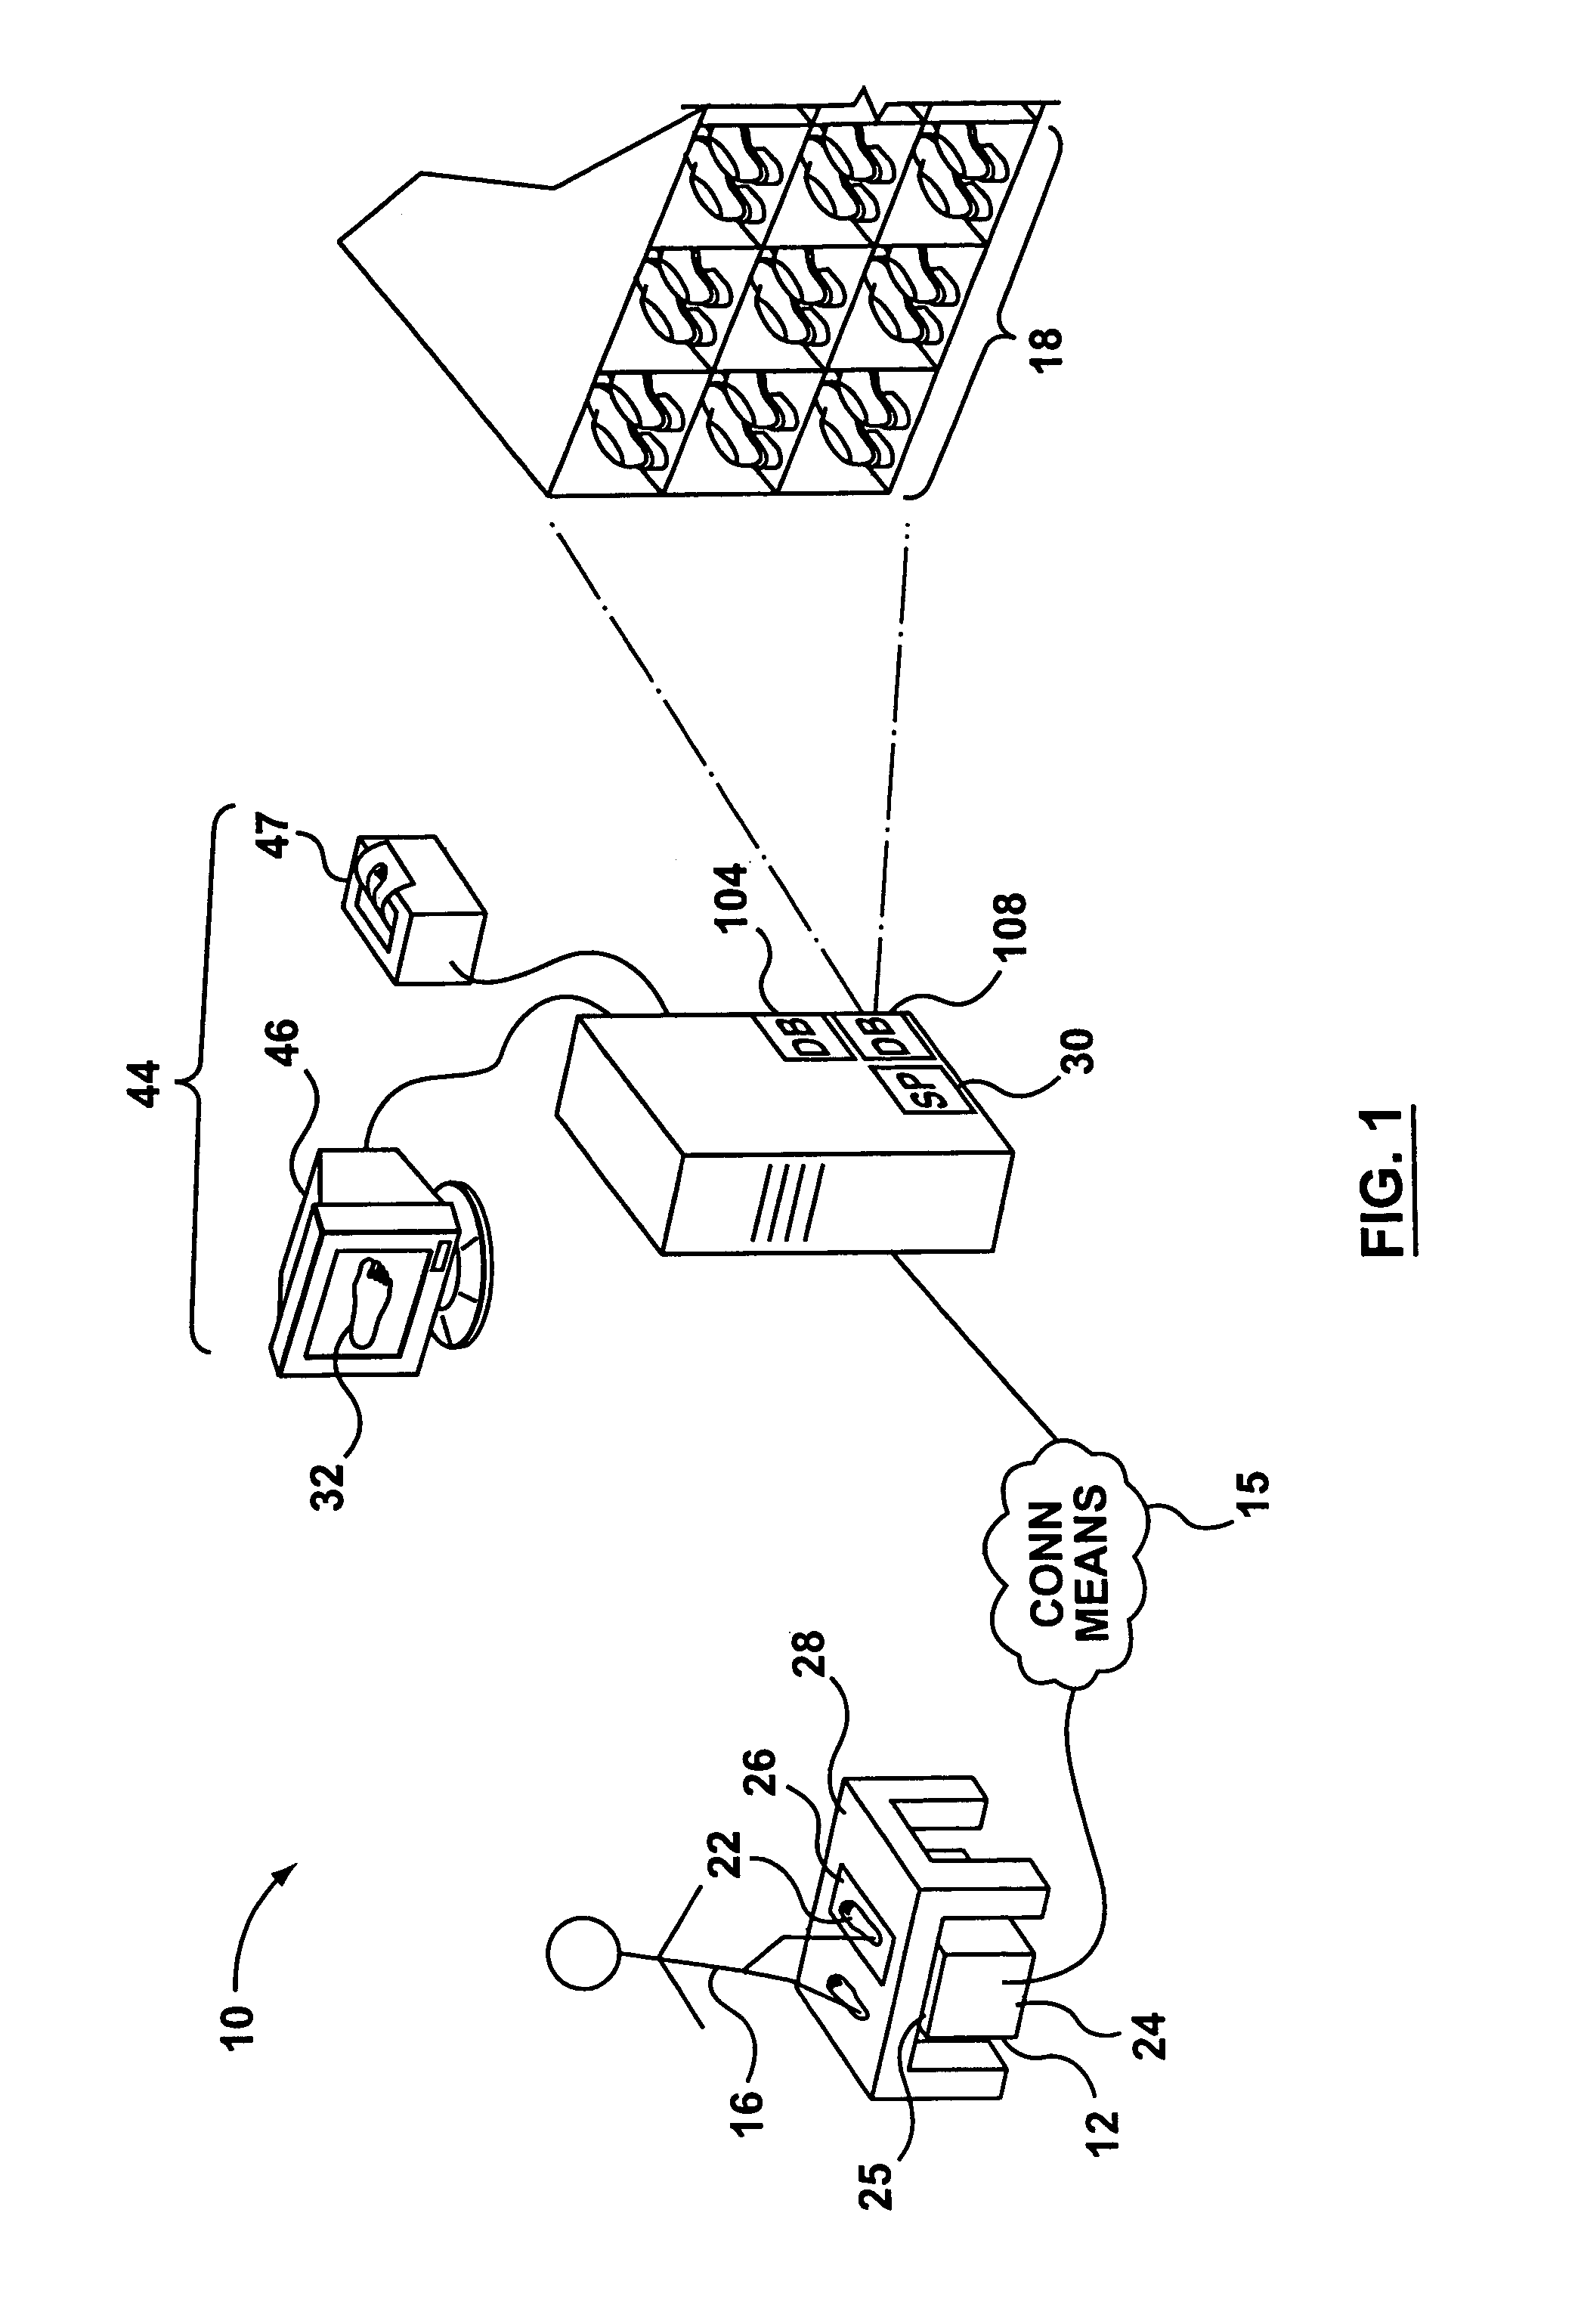 Method and system for sizing feet and fitting shoes